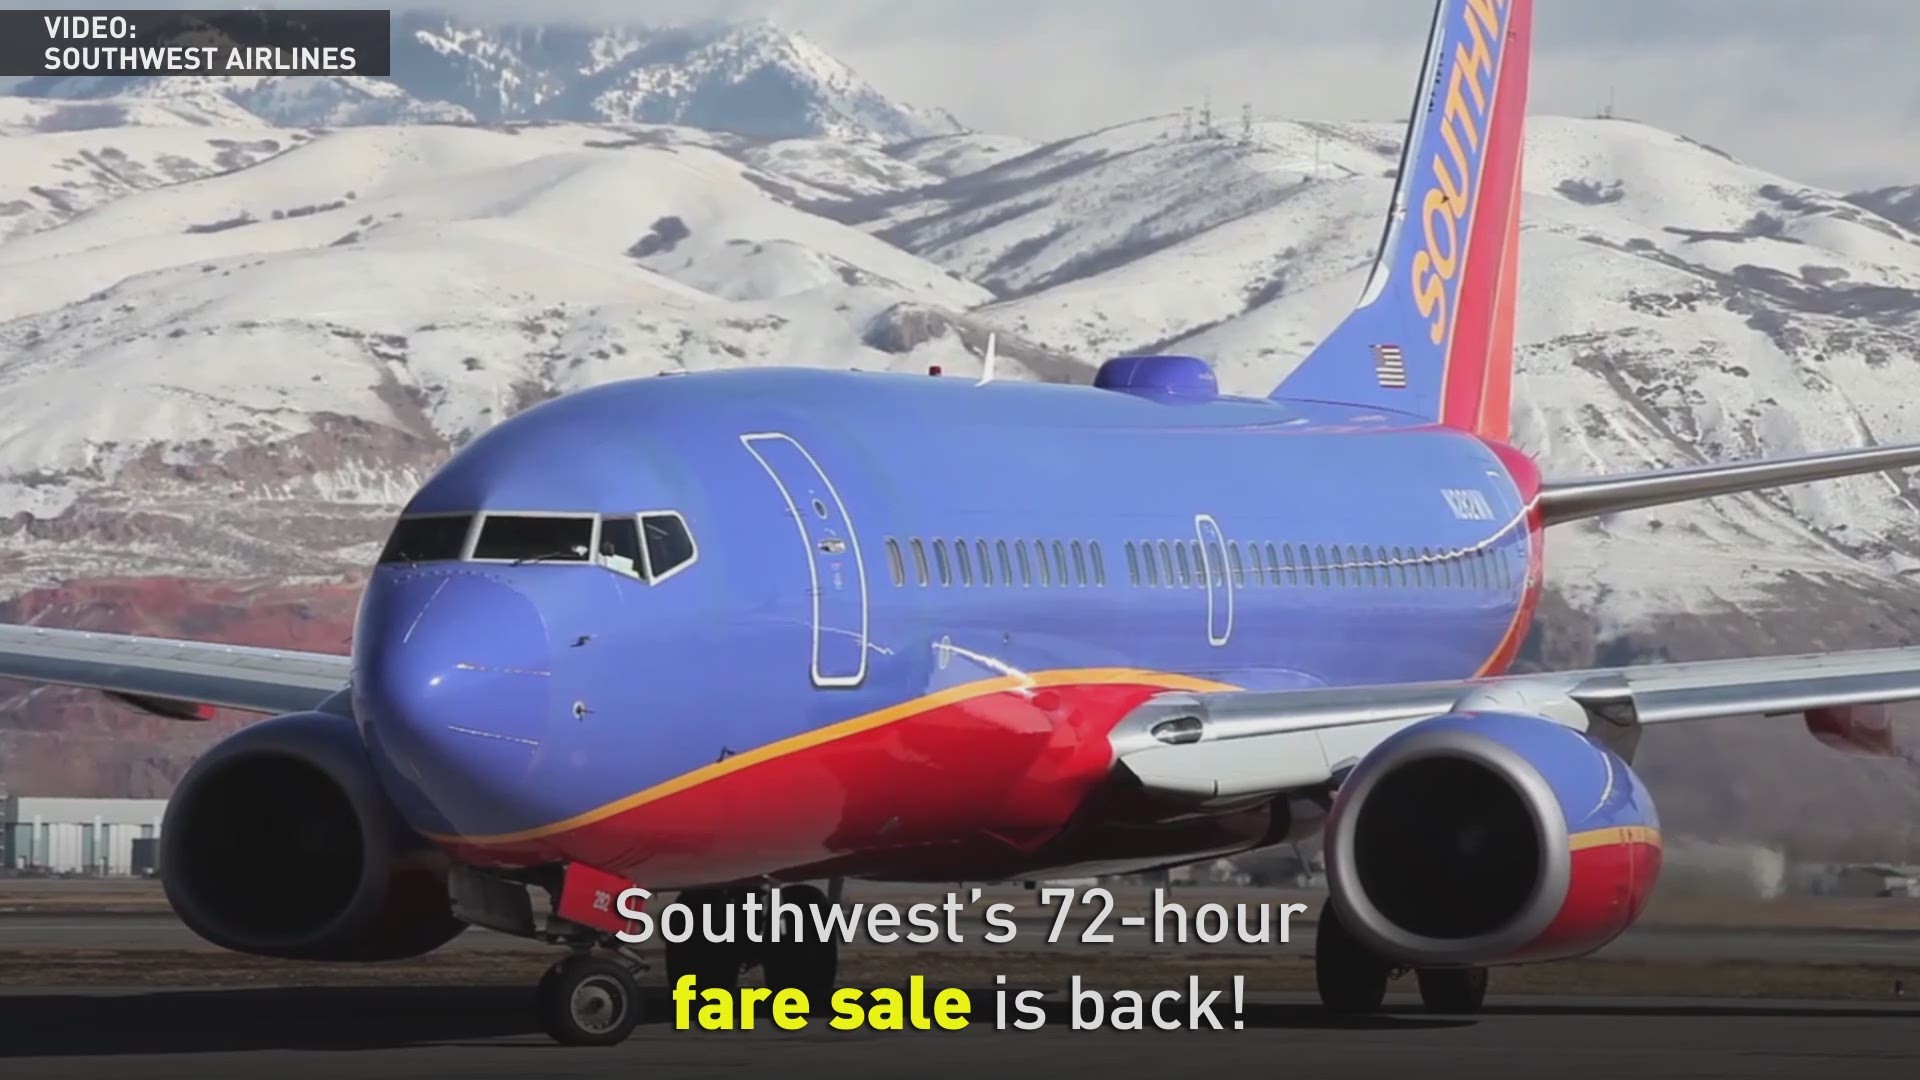 It's that time of year again. Southwest's semi-annual sale is back for Winter 2019 with flights starting at $49 one-way.